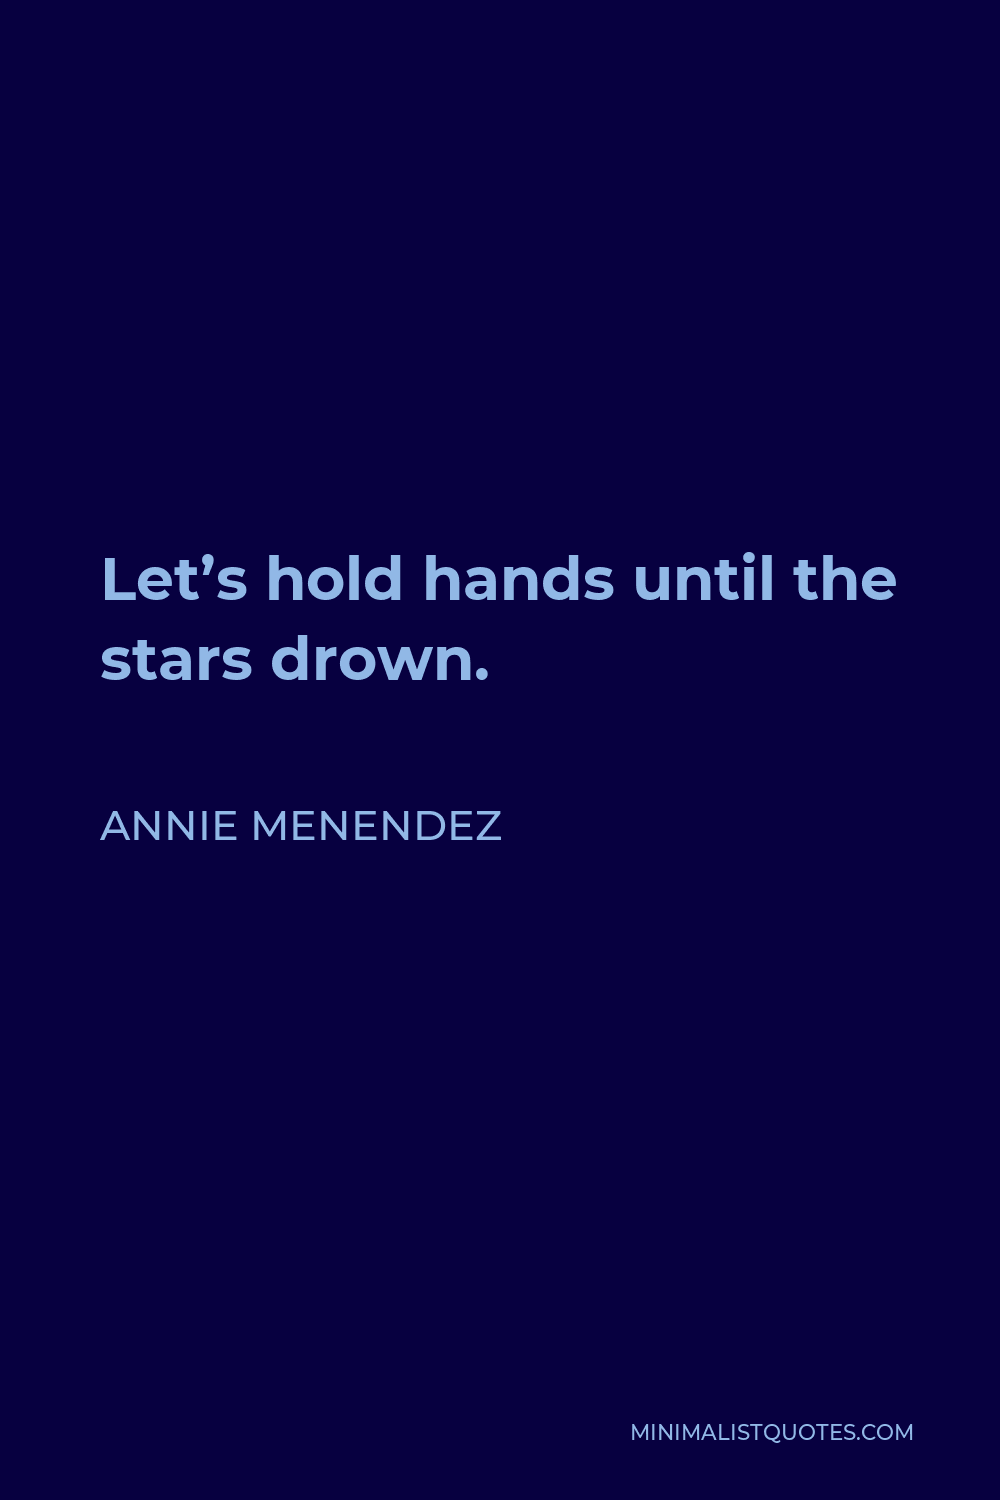 Annie Menendez Quote - Let’s hold hands until the stars drown.